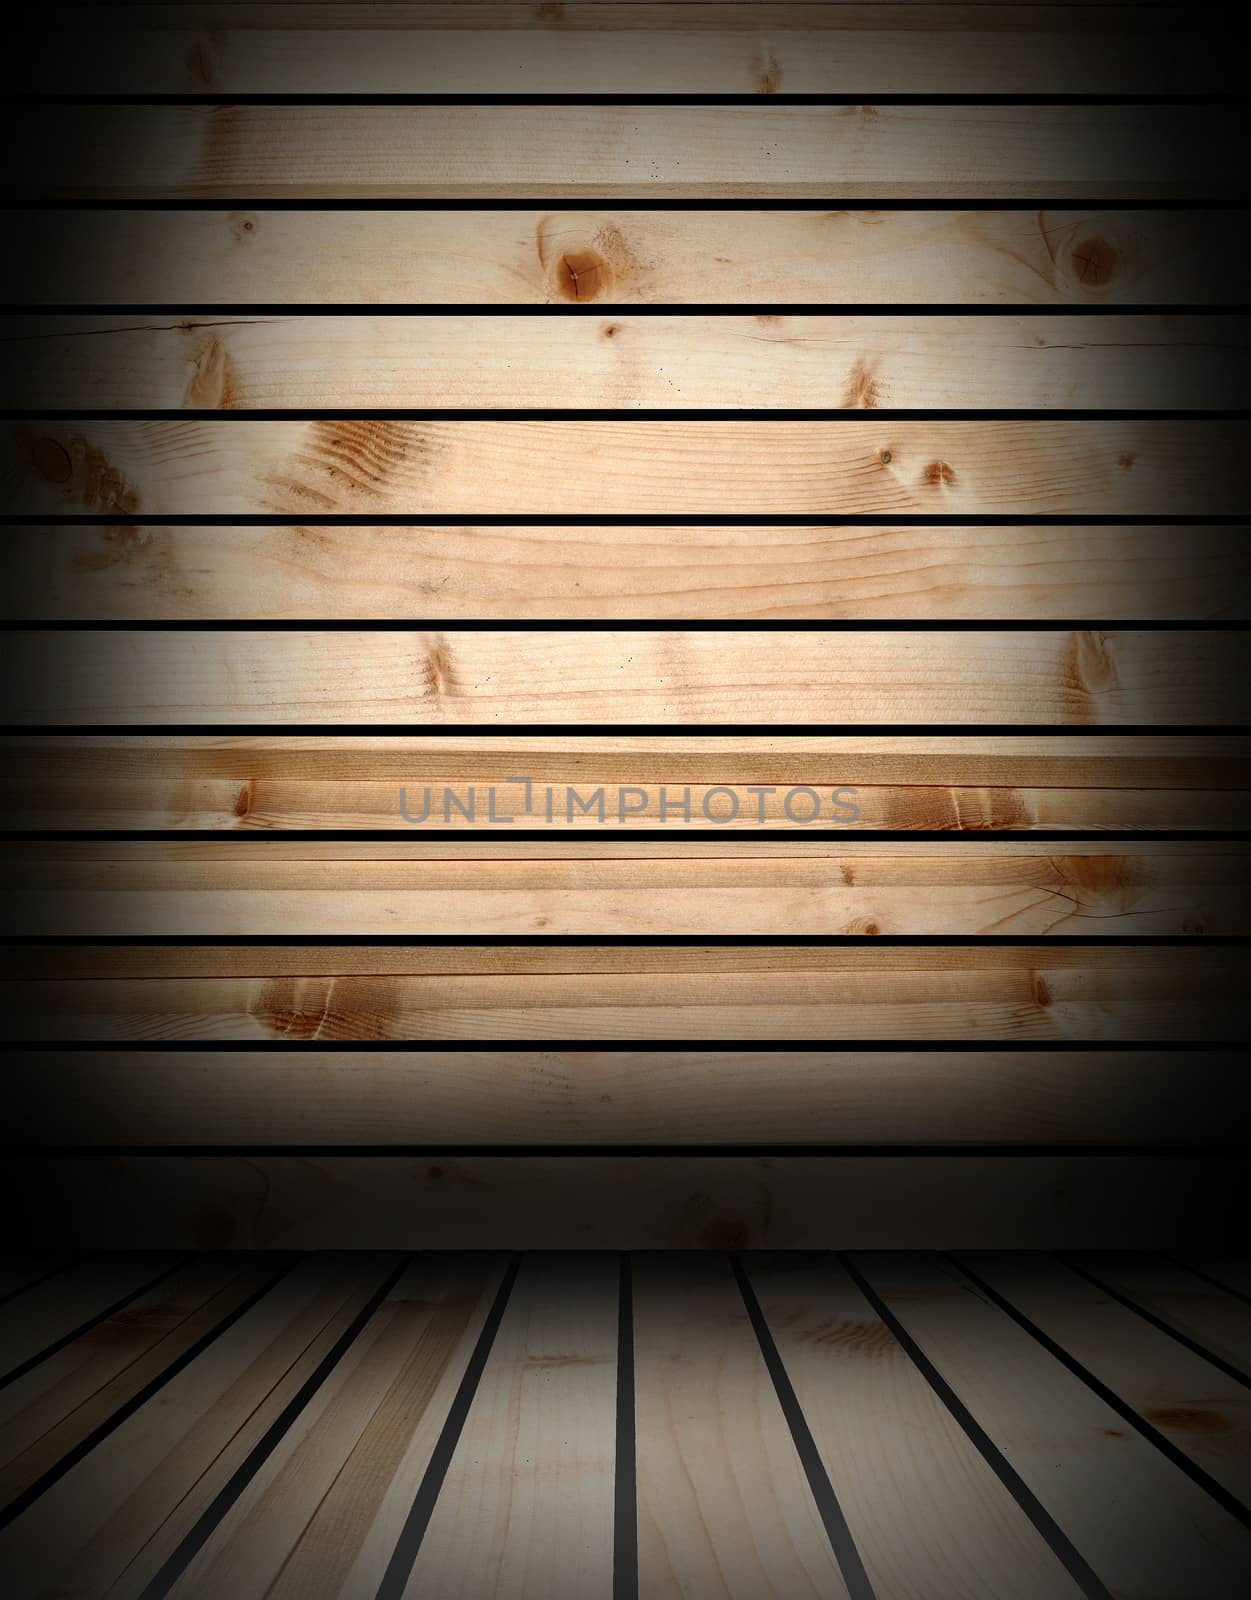 architectural wooden lodge  interior backdrop with vignette